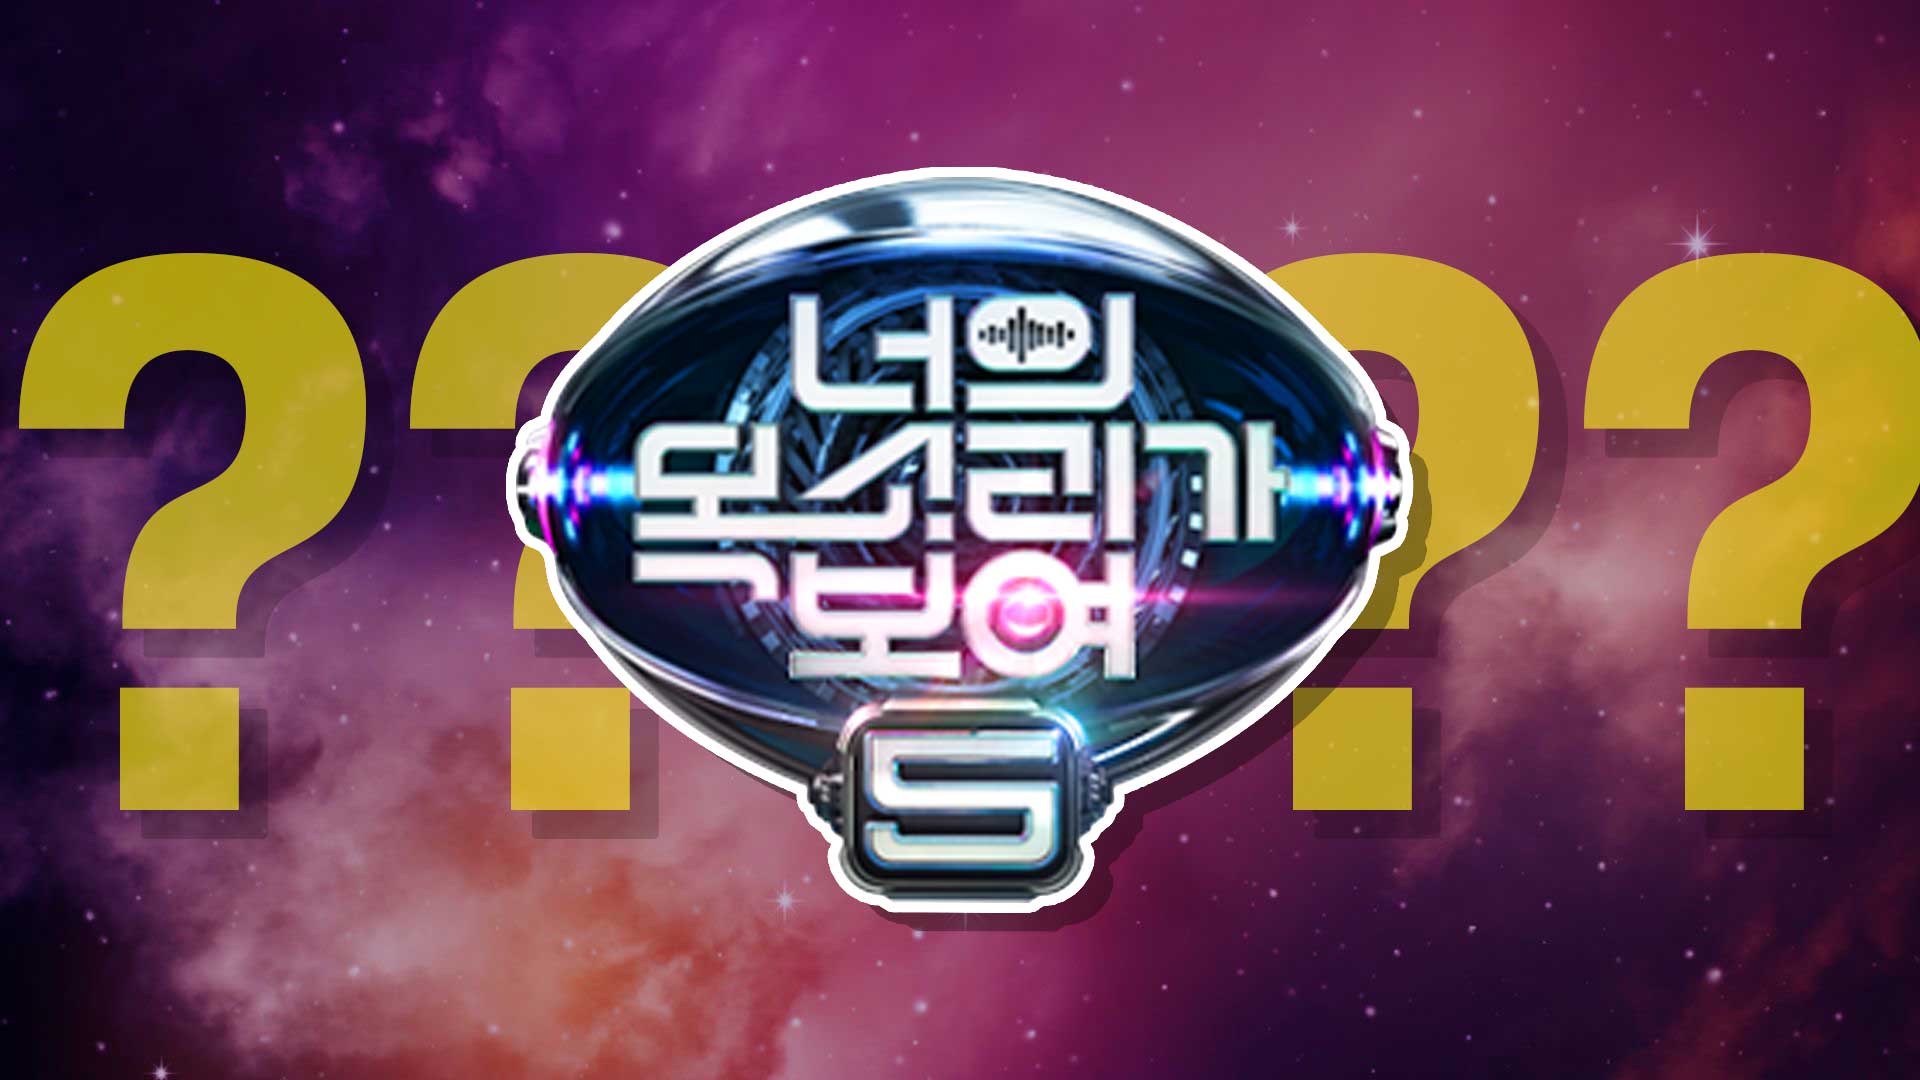 Korean logo for the show I Can See Your Voice